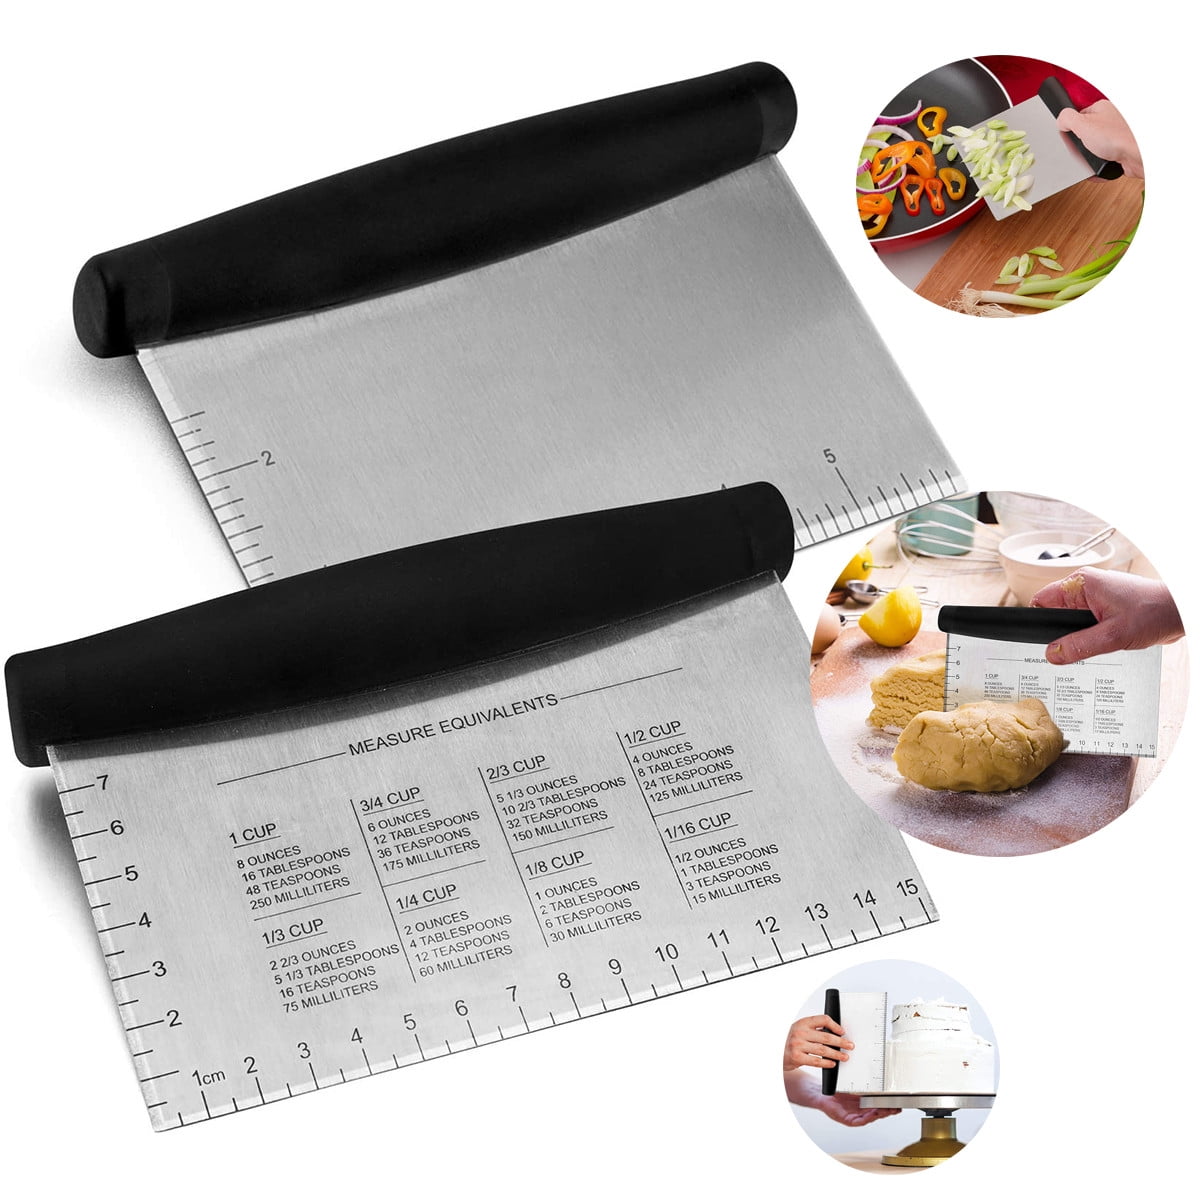 EIMELI Metal Griddle Scraper Chopper, Stainless Steel Dough Bench Scraper  Pastry Cutter with Measuring Marks, Multi-purpose Kitchen Tool for Flat Top  Grilling/Baking/Cooking, Dishwasher Safe 